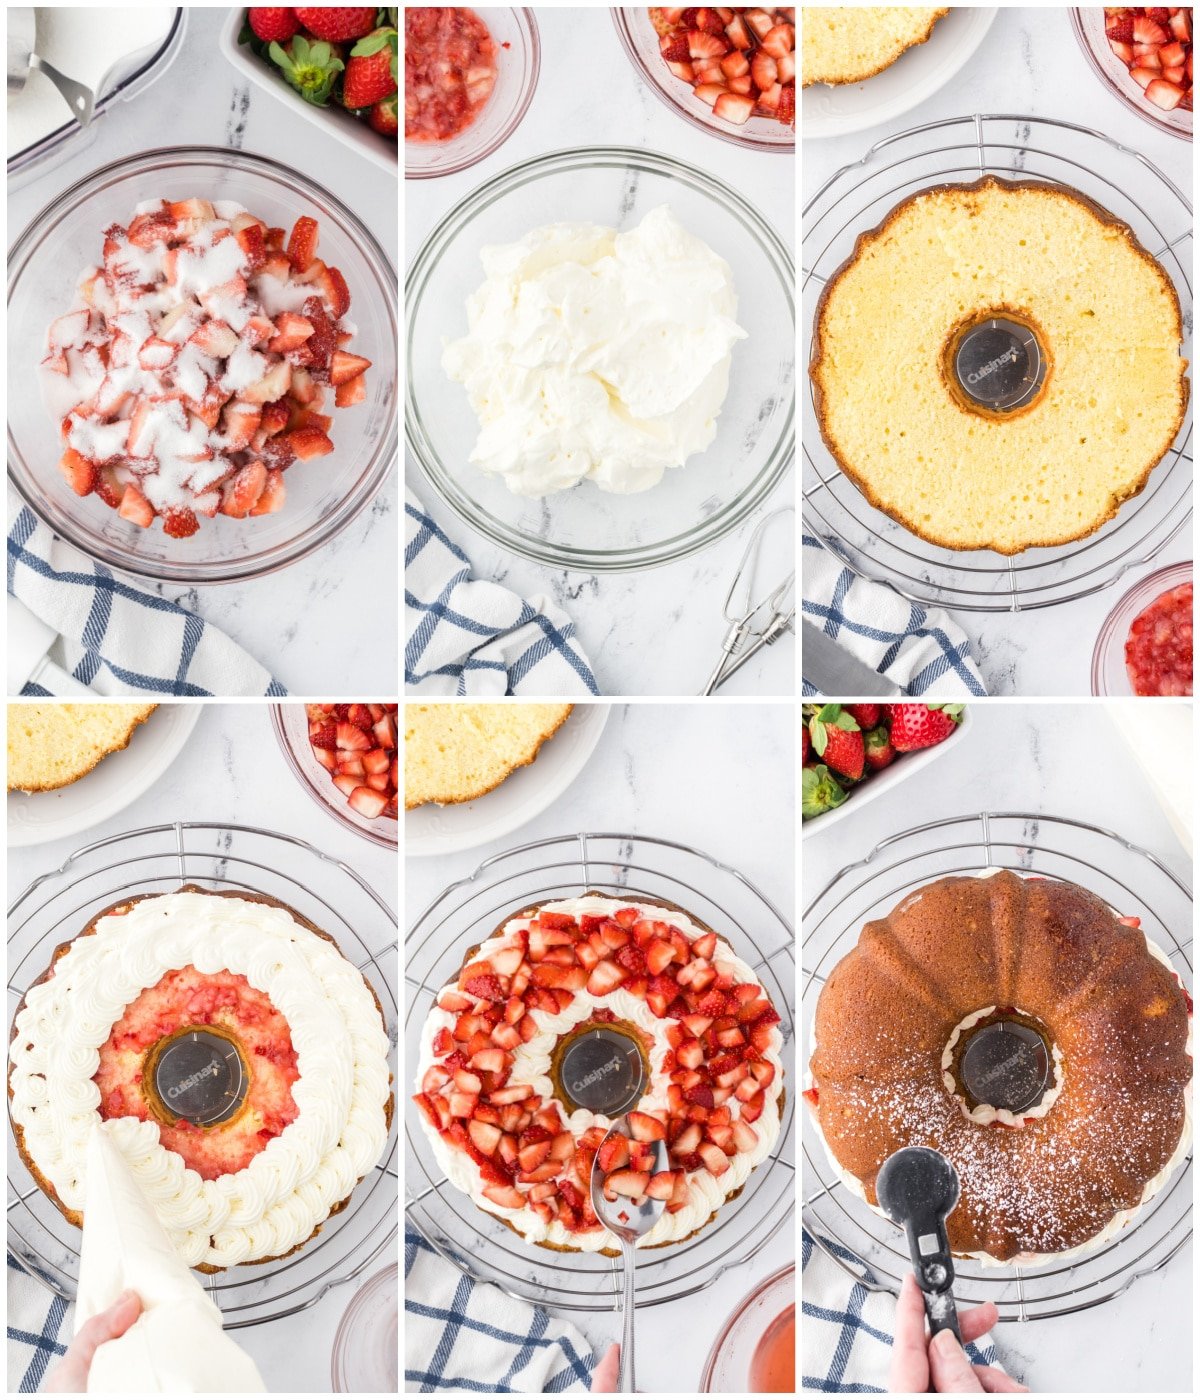 A collage of six images showing how to assemble the strawberry shortcake.